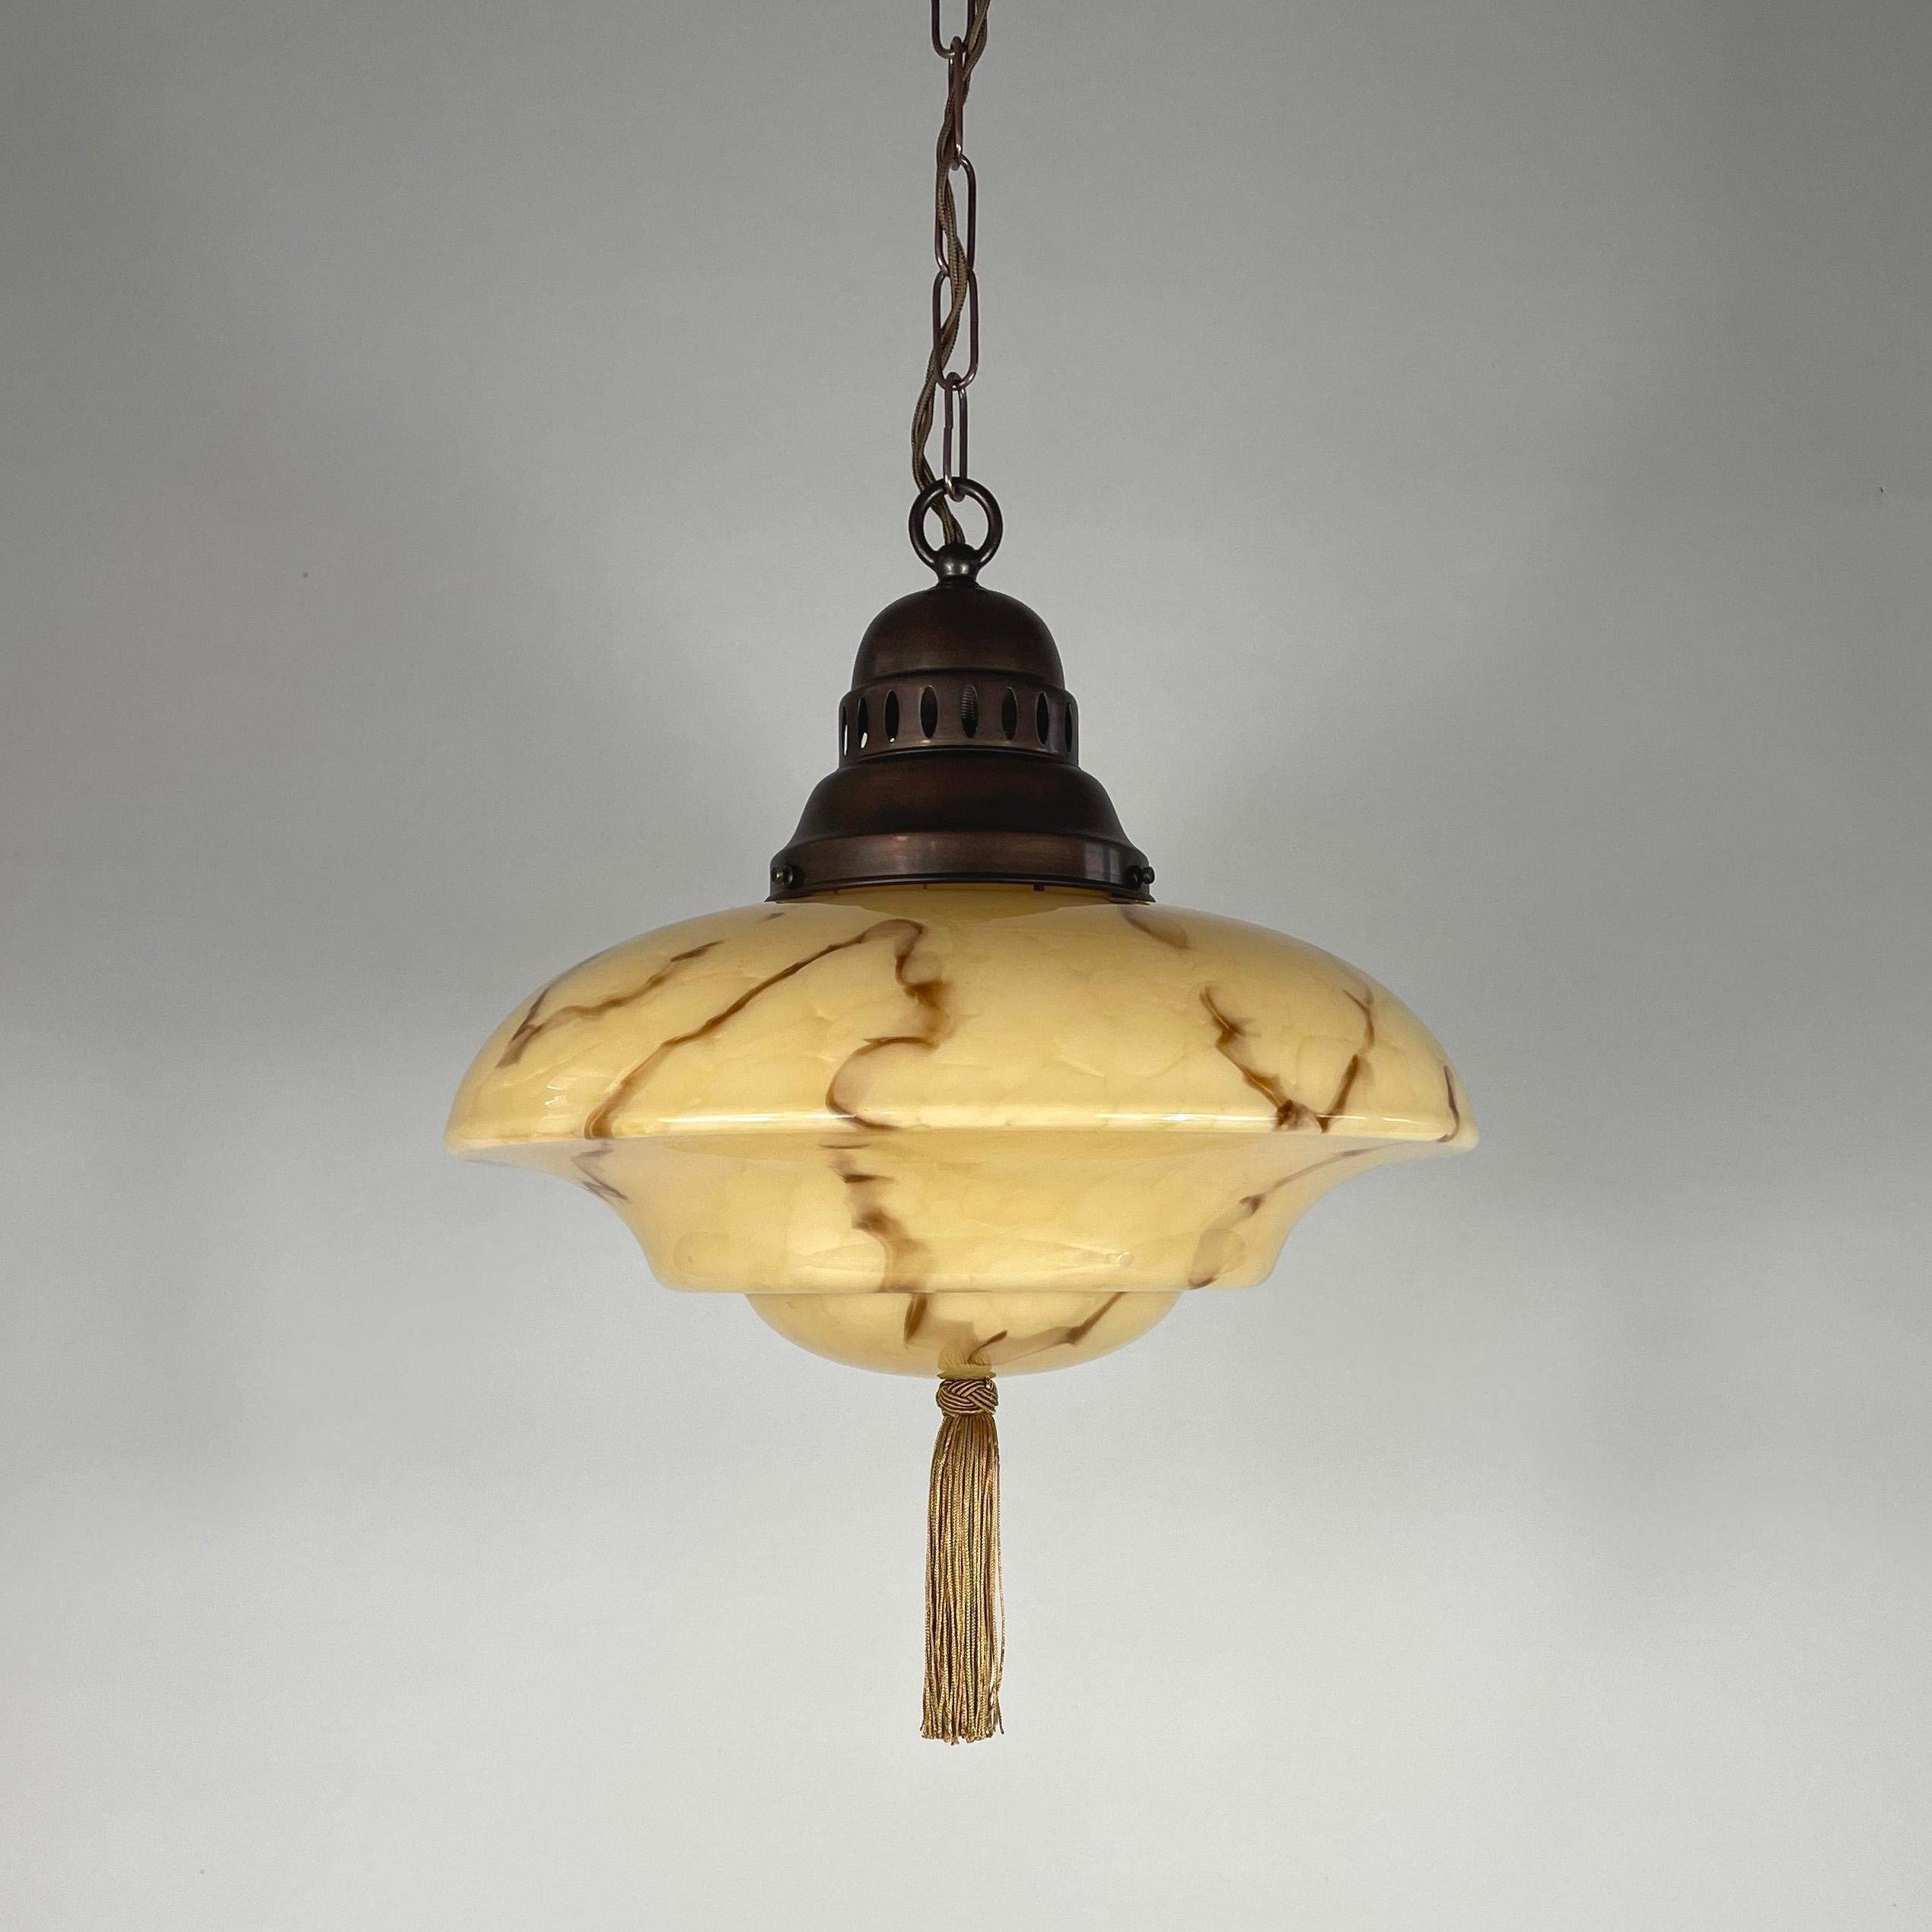 This unusual Art Deco fixture was designed and manufactured in Germany in the 1920s to 1930s during the Bauhaus period. It features a dark cream colored marbled glass lampshade, a bronze silk tassel and bronzed brass hardware.

The light has been